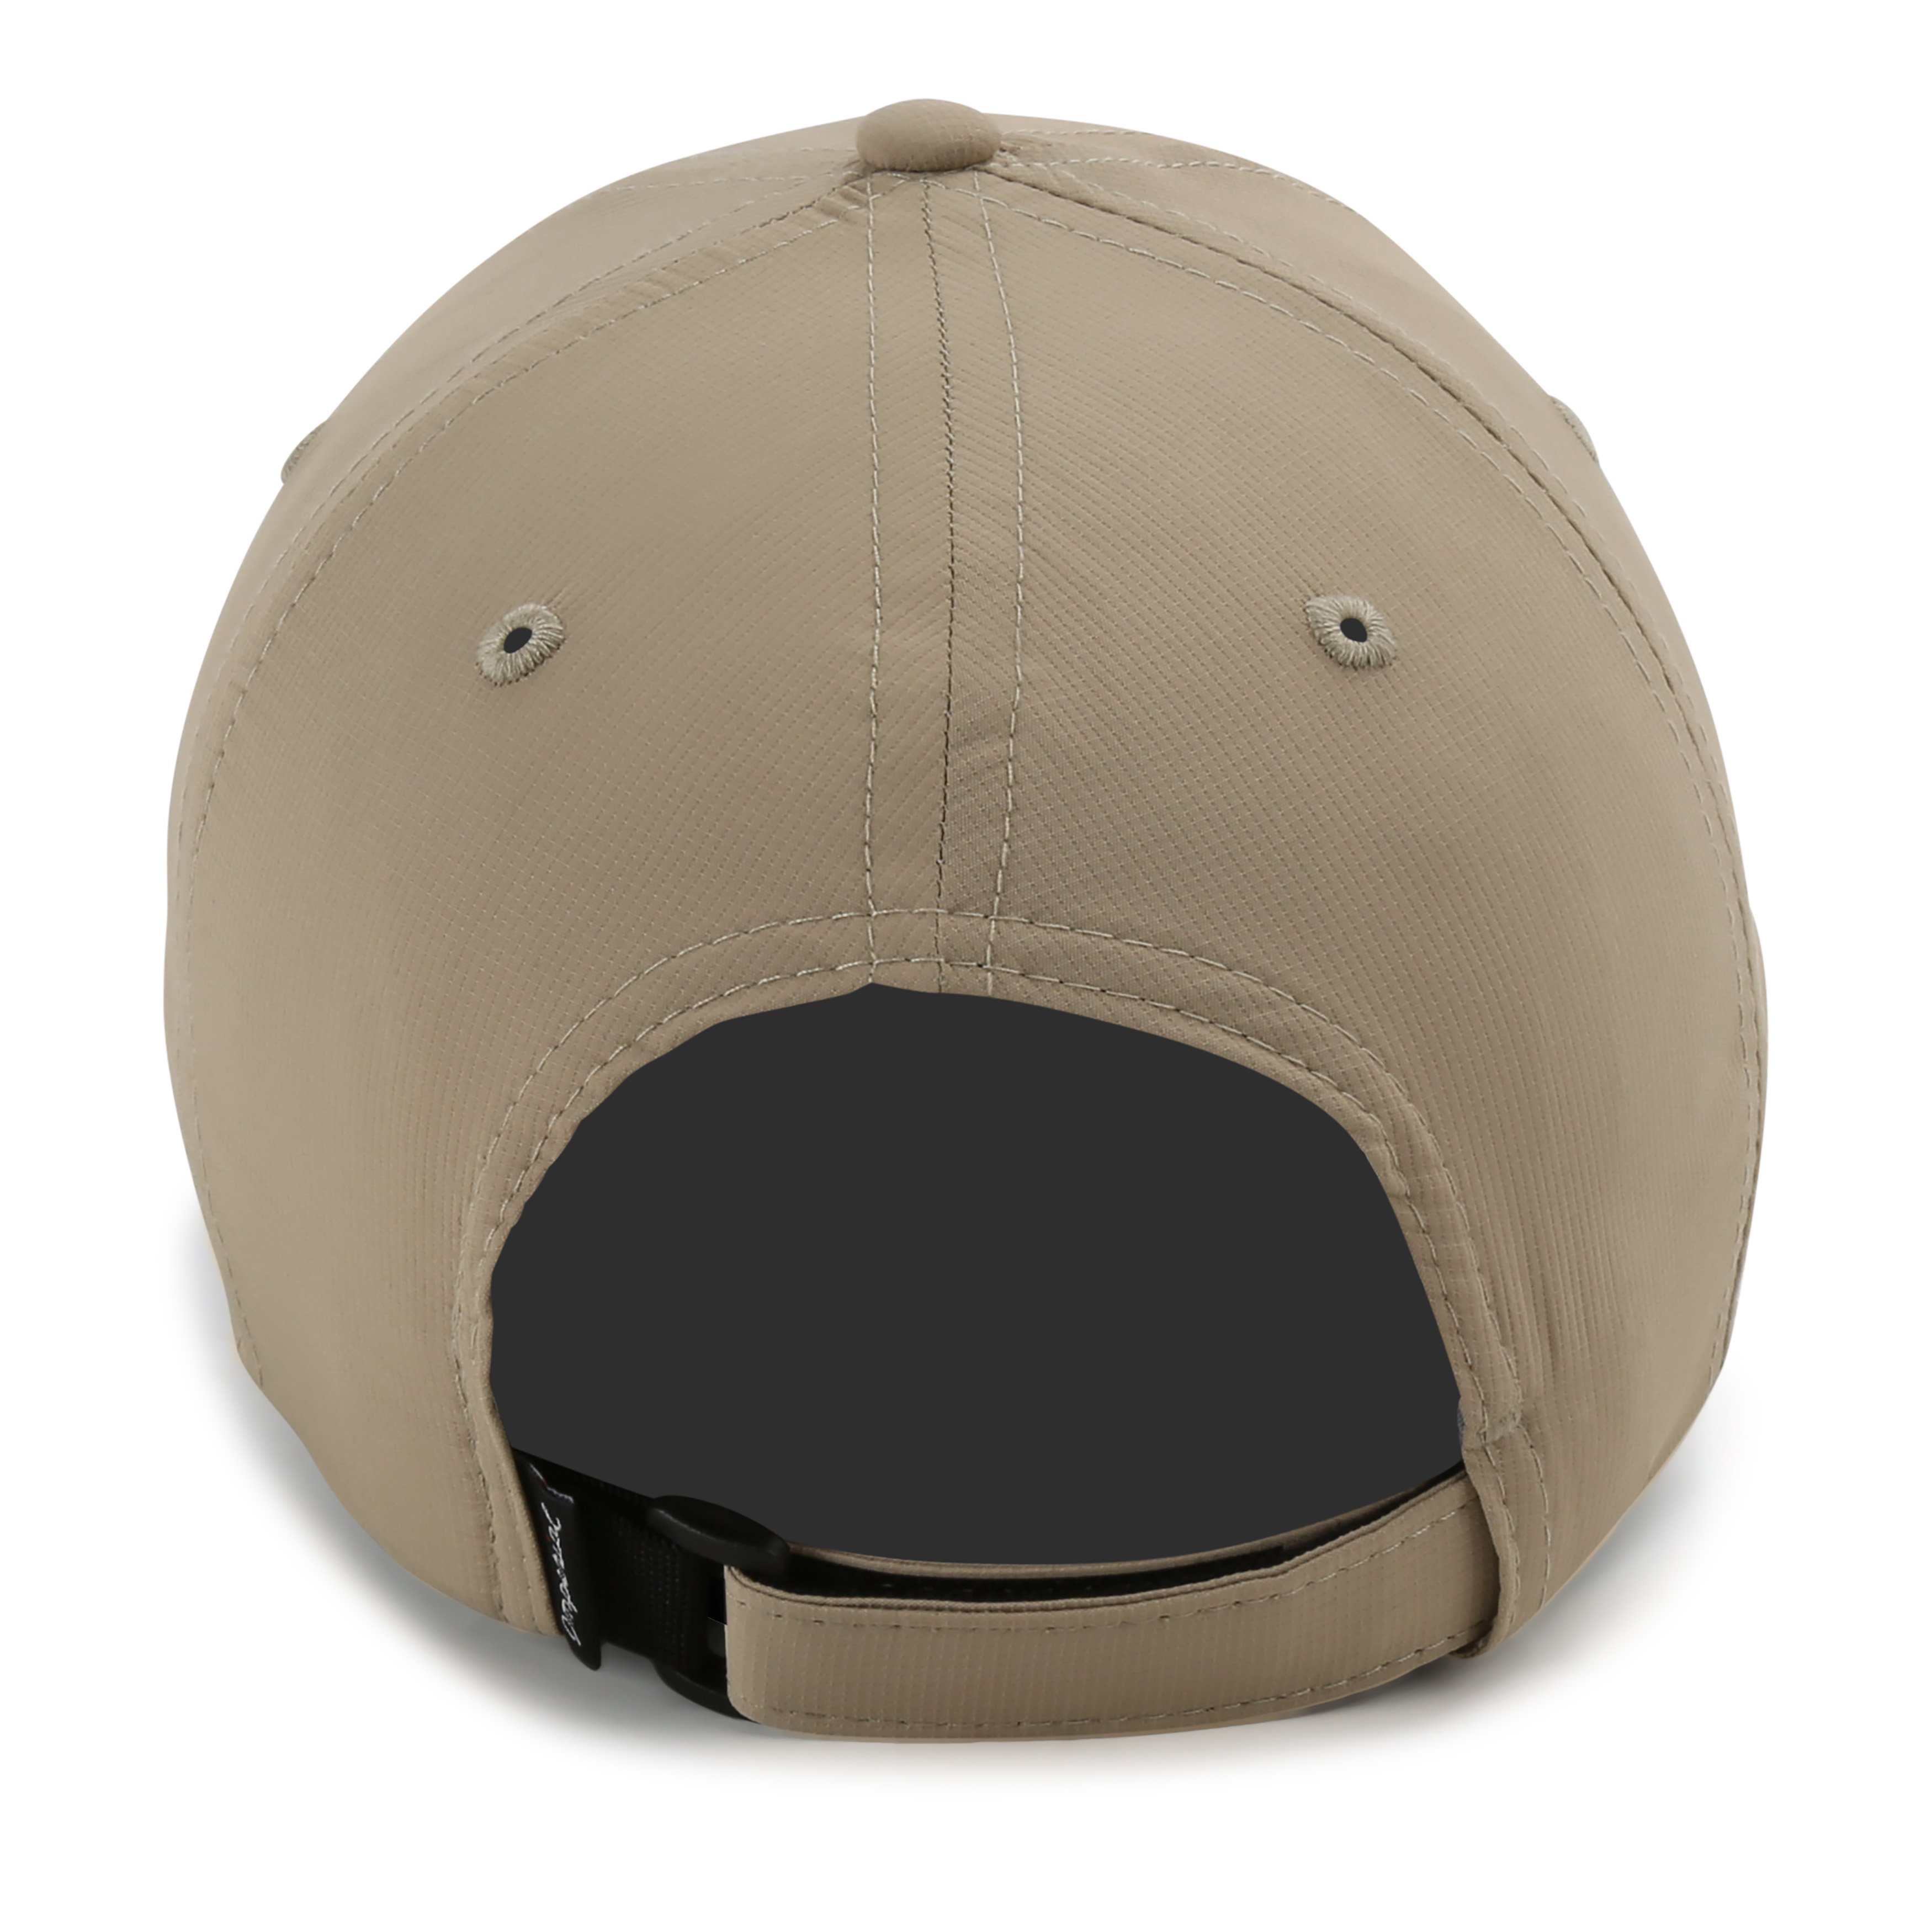 Ale serie Afkorting Men's Imperial Adjustable Extra Large Fit Hat, Polyester | The Original  Performance XL Cap XL210P